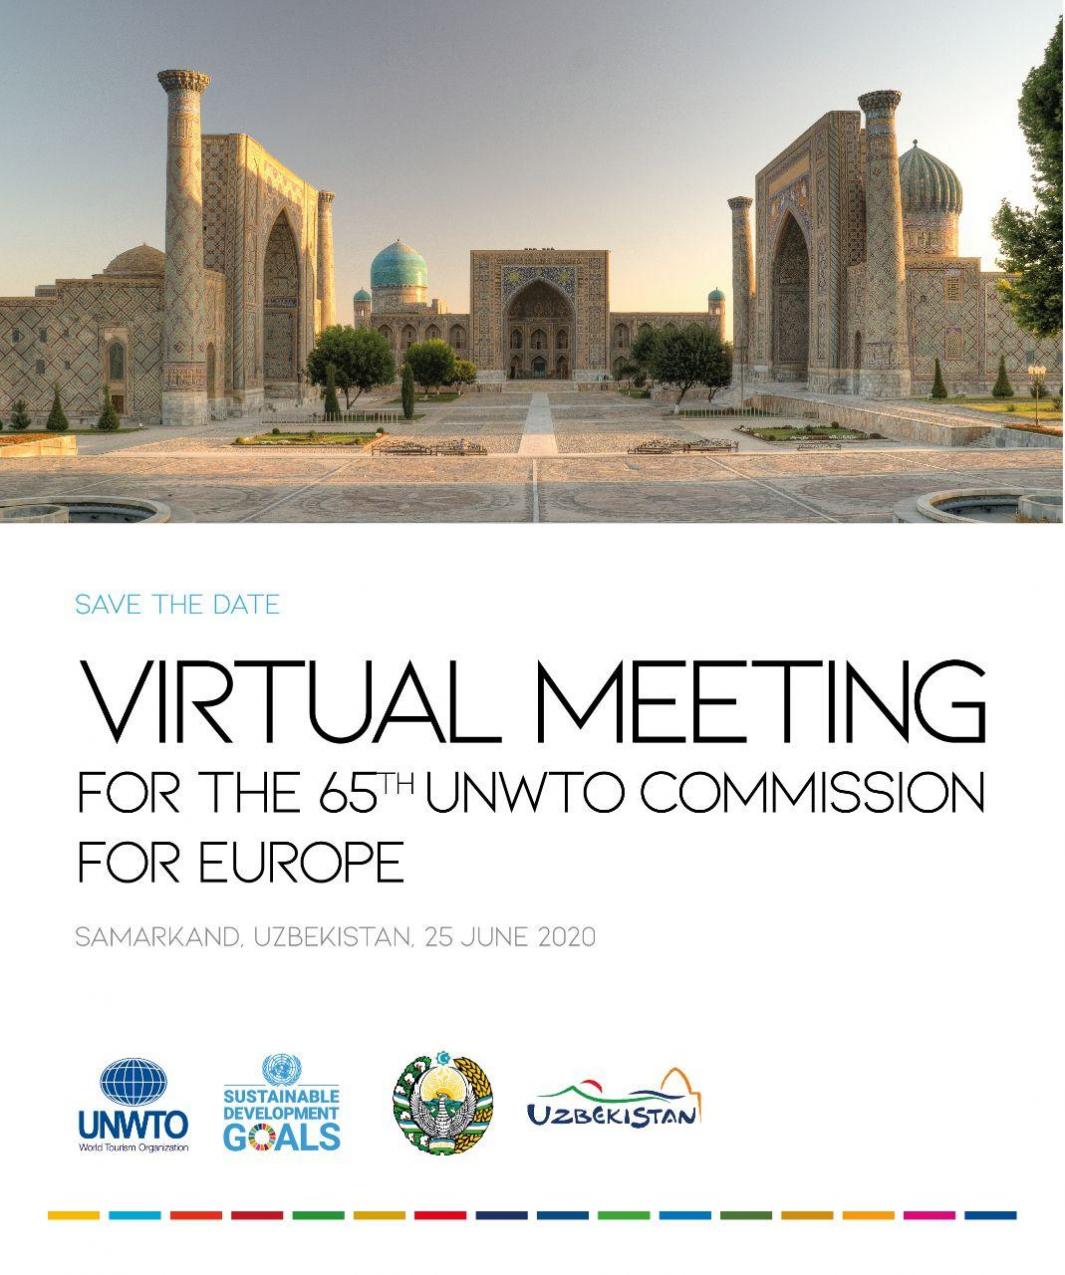 Uzbekistan will host the 65th session of the UNWTO European Regional Commission